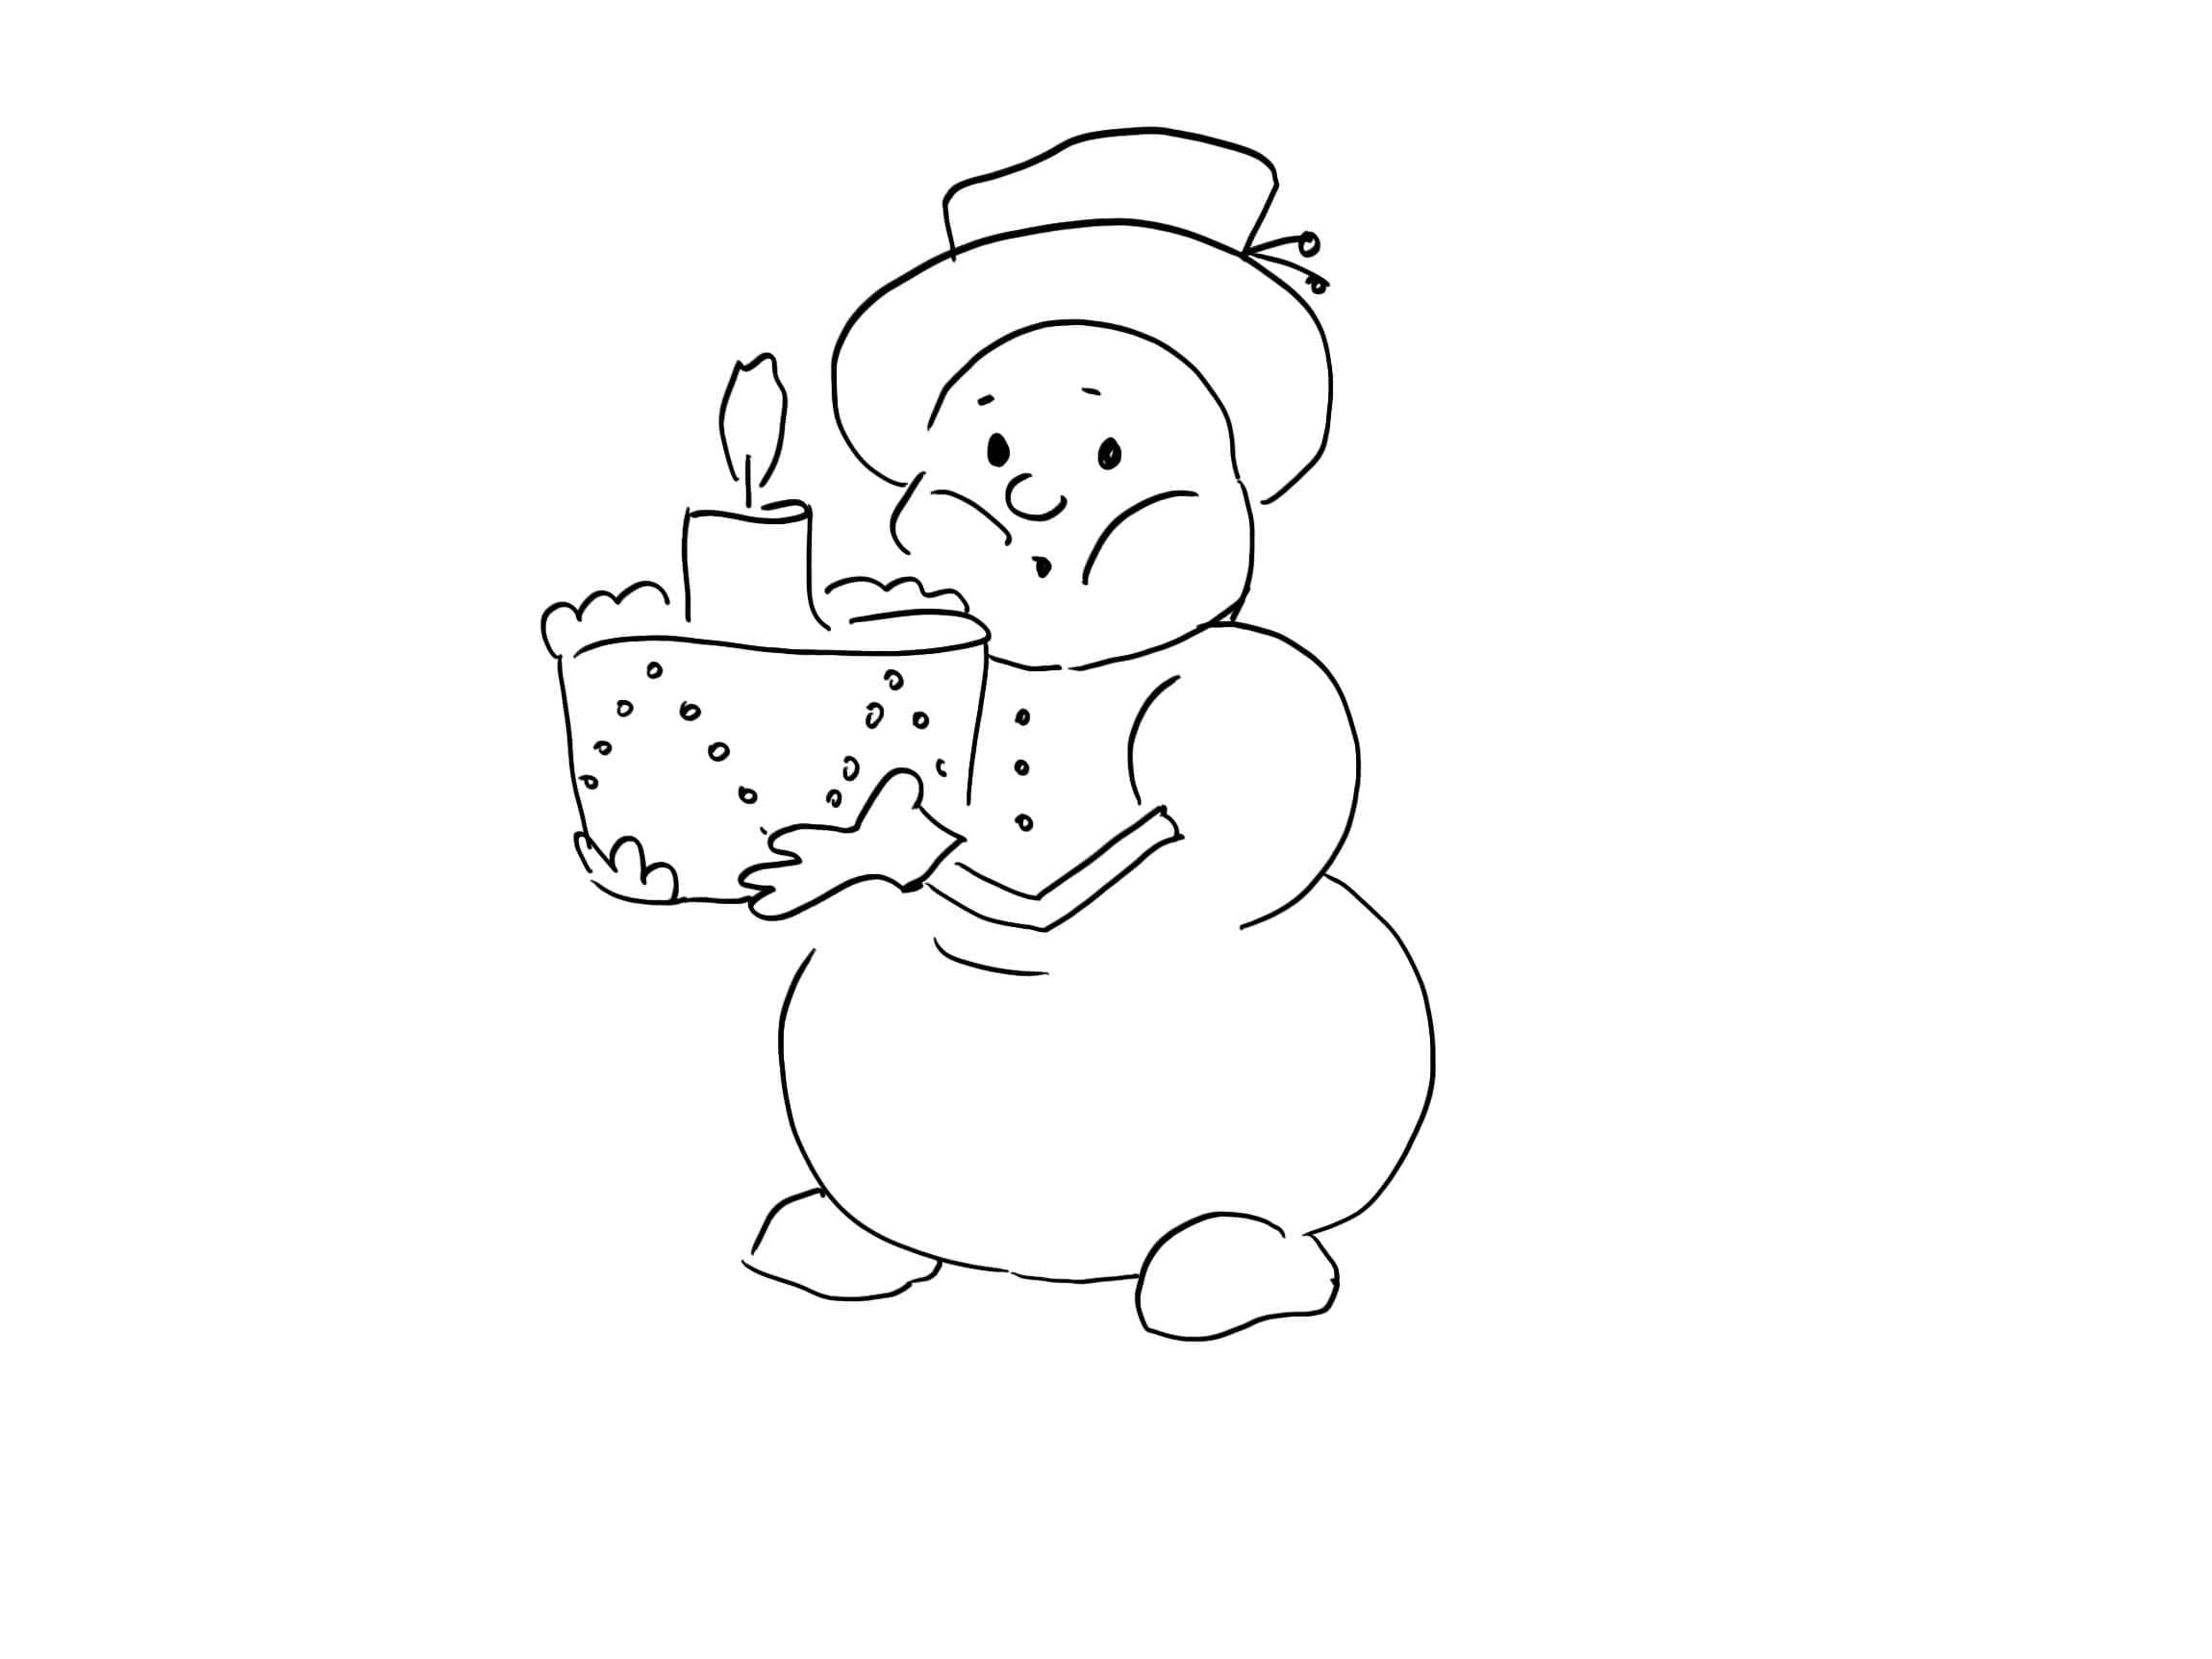 Snowman Looking Forward To Christmas Coloring Page